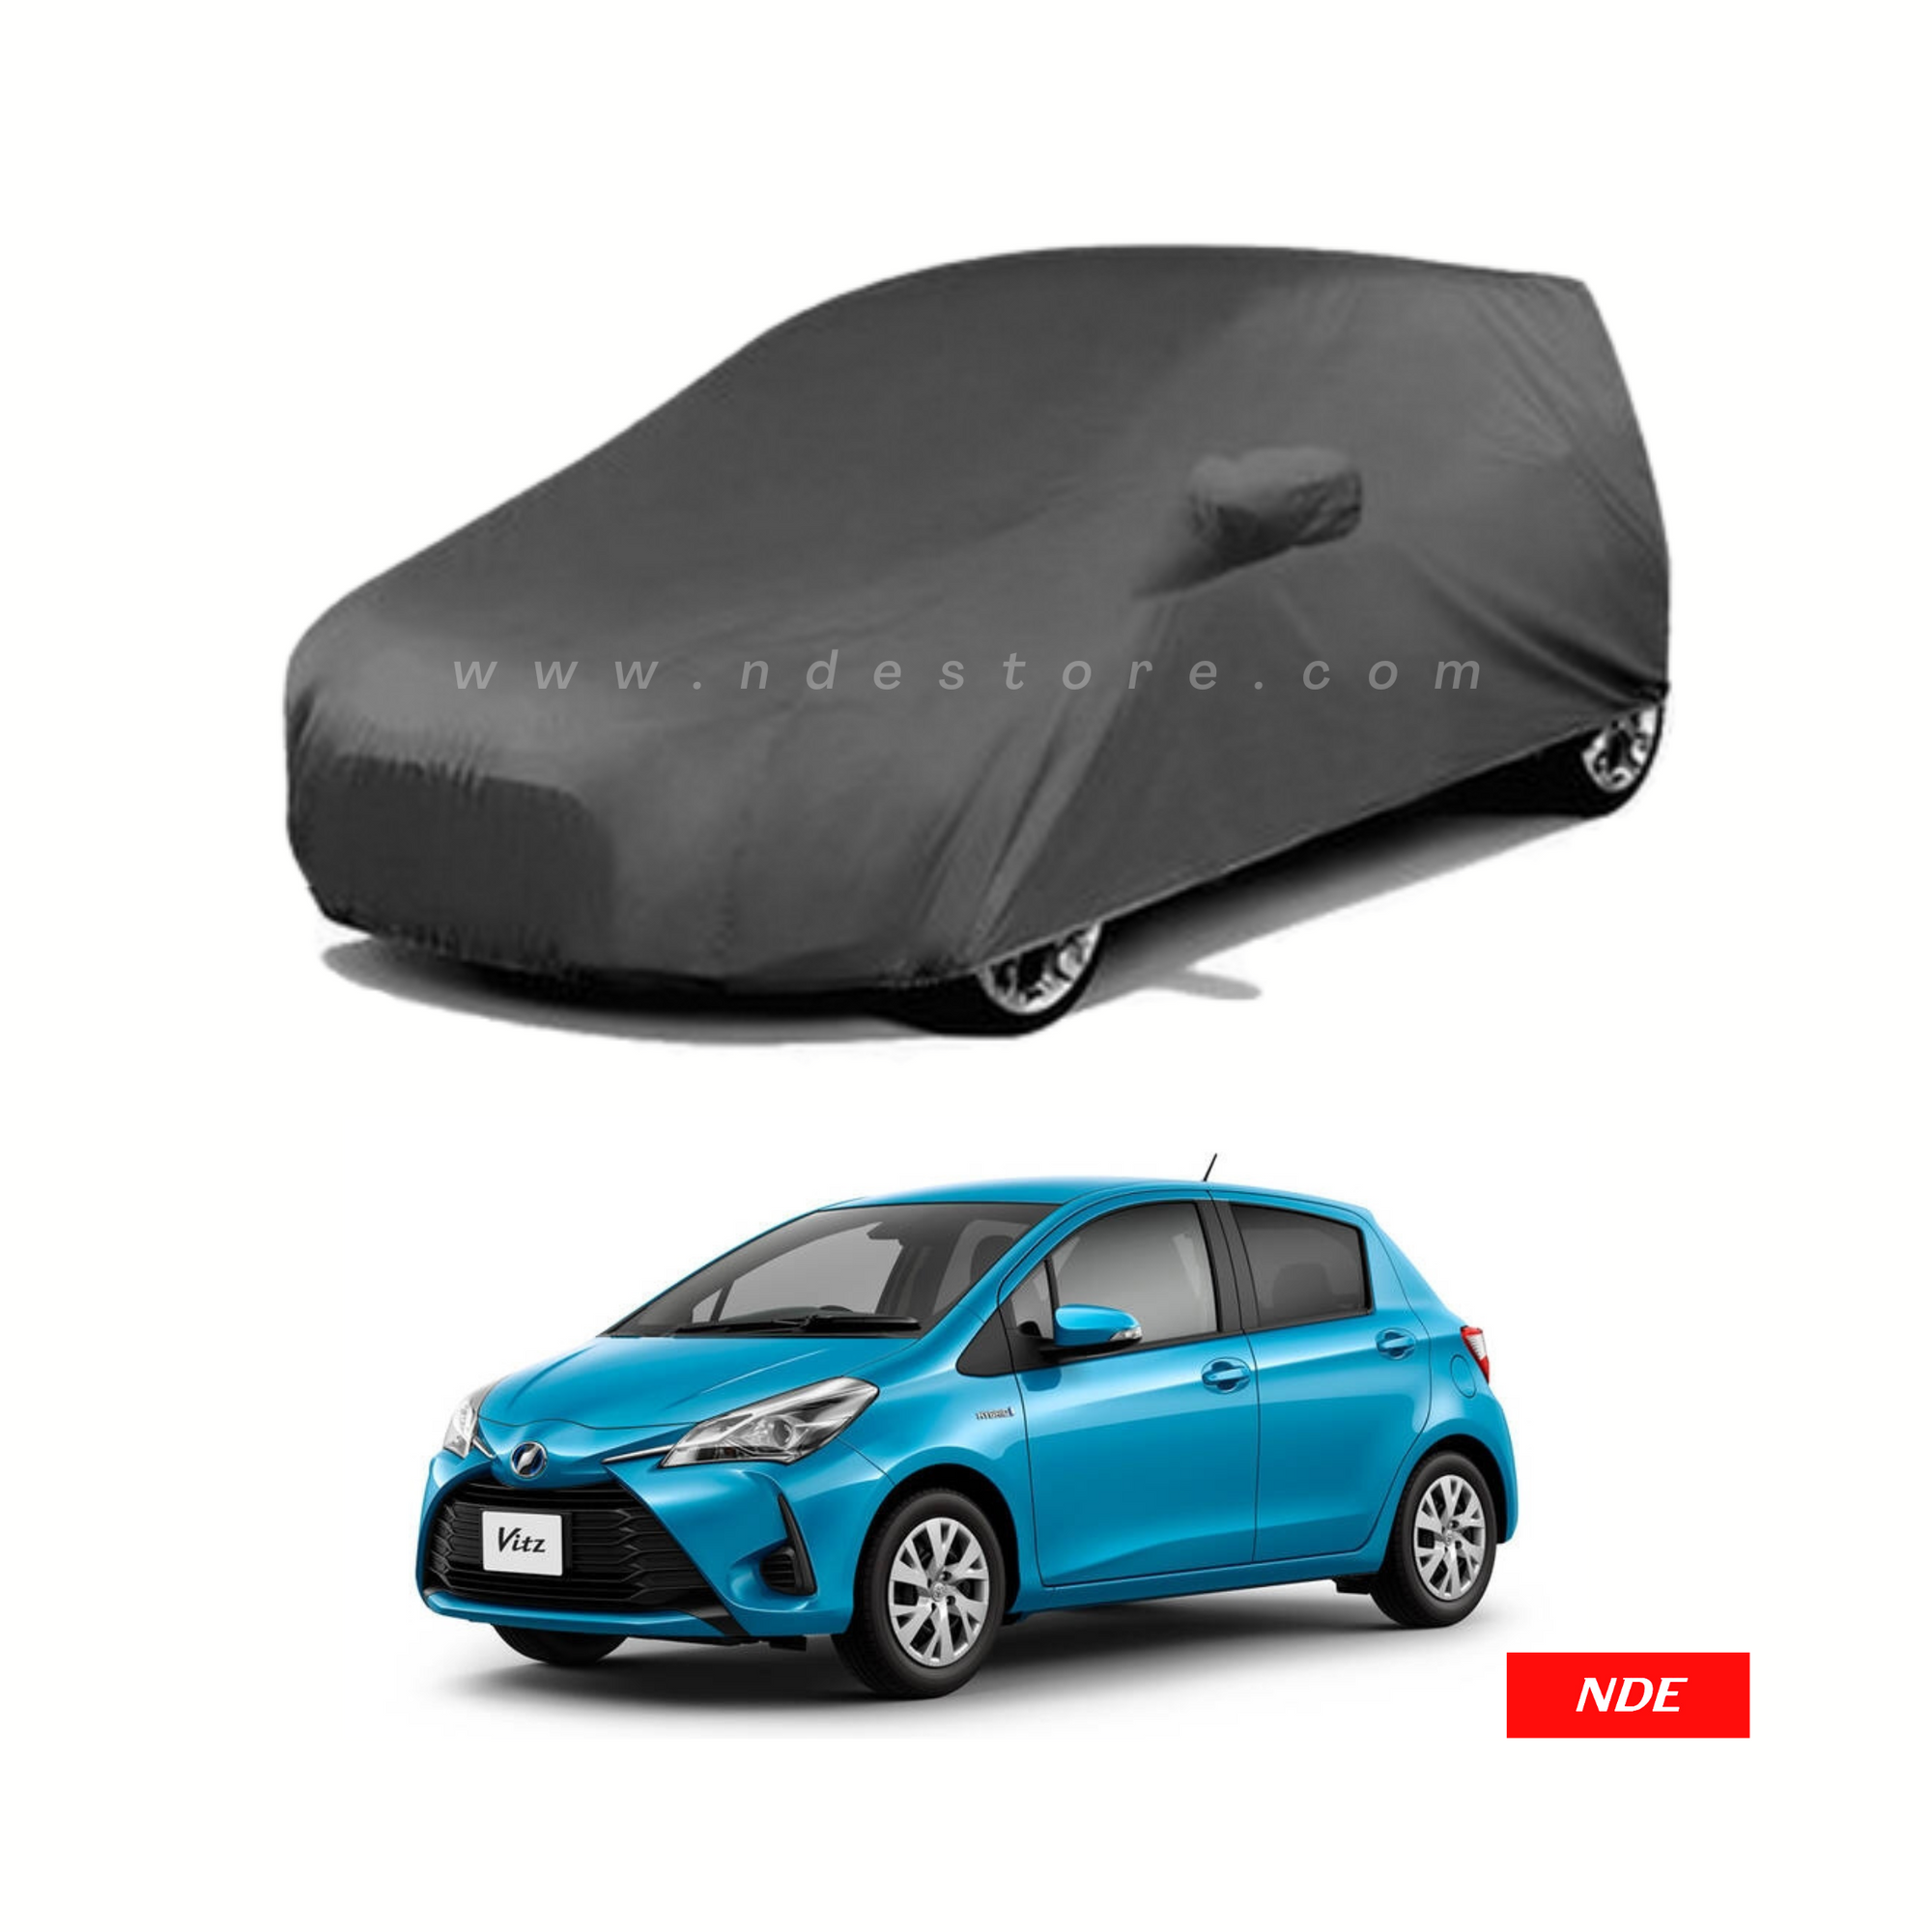 TOP COVER MICROFIBER FOR TOYOTA VITZ (ALL MODELS)